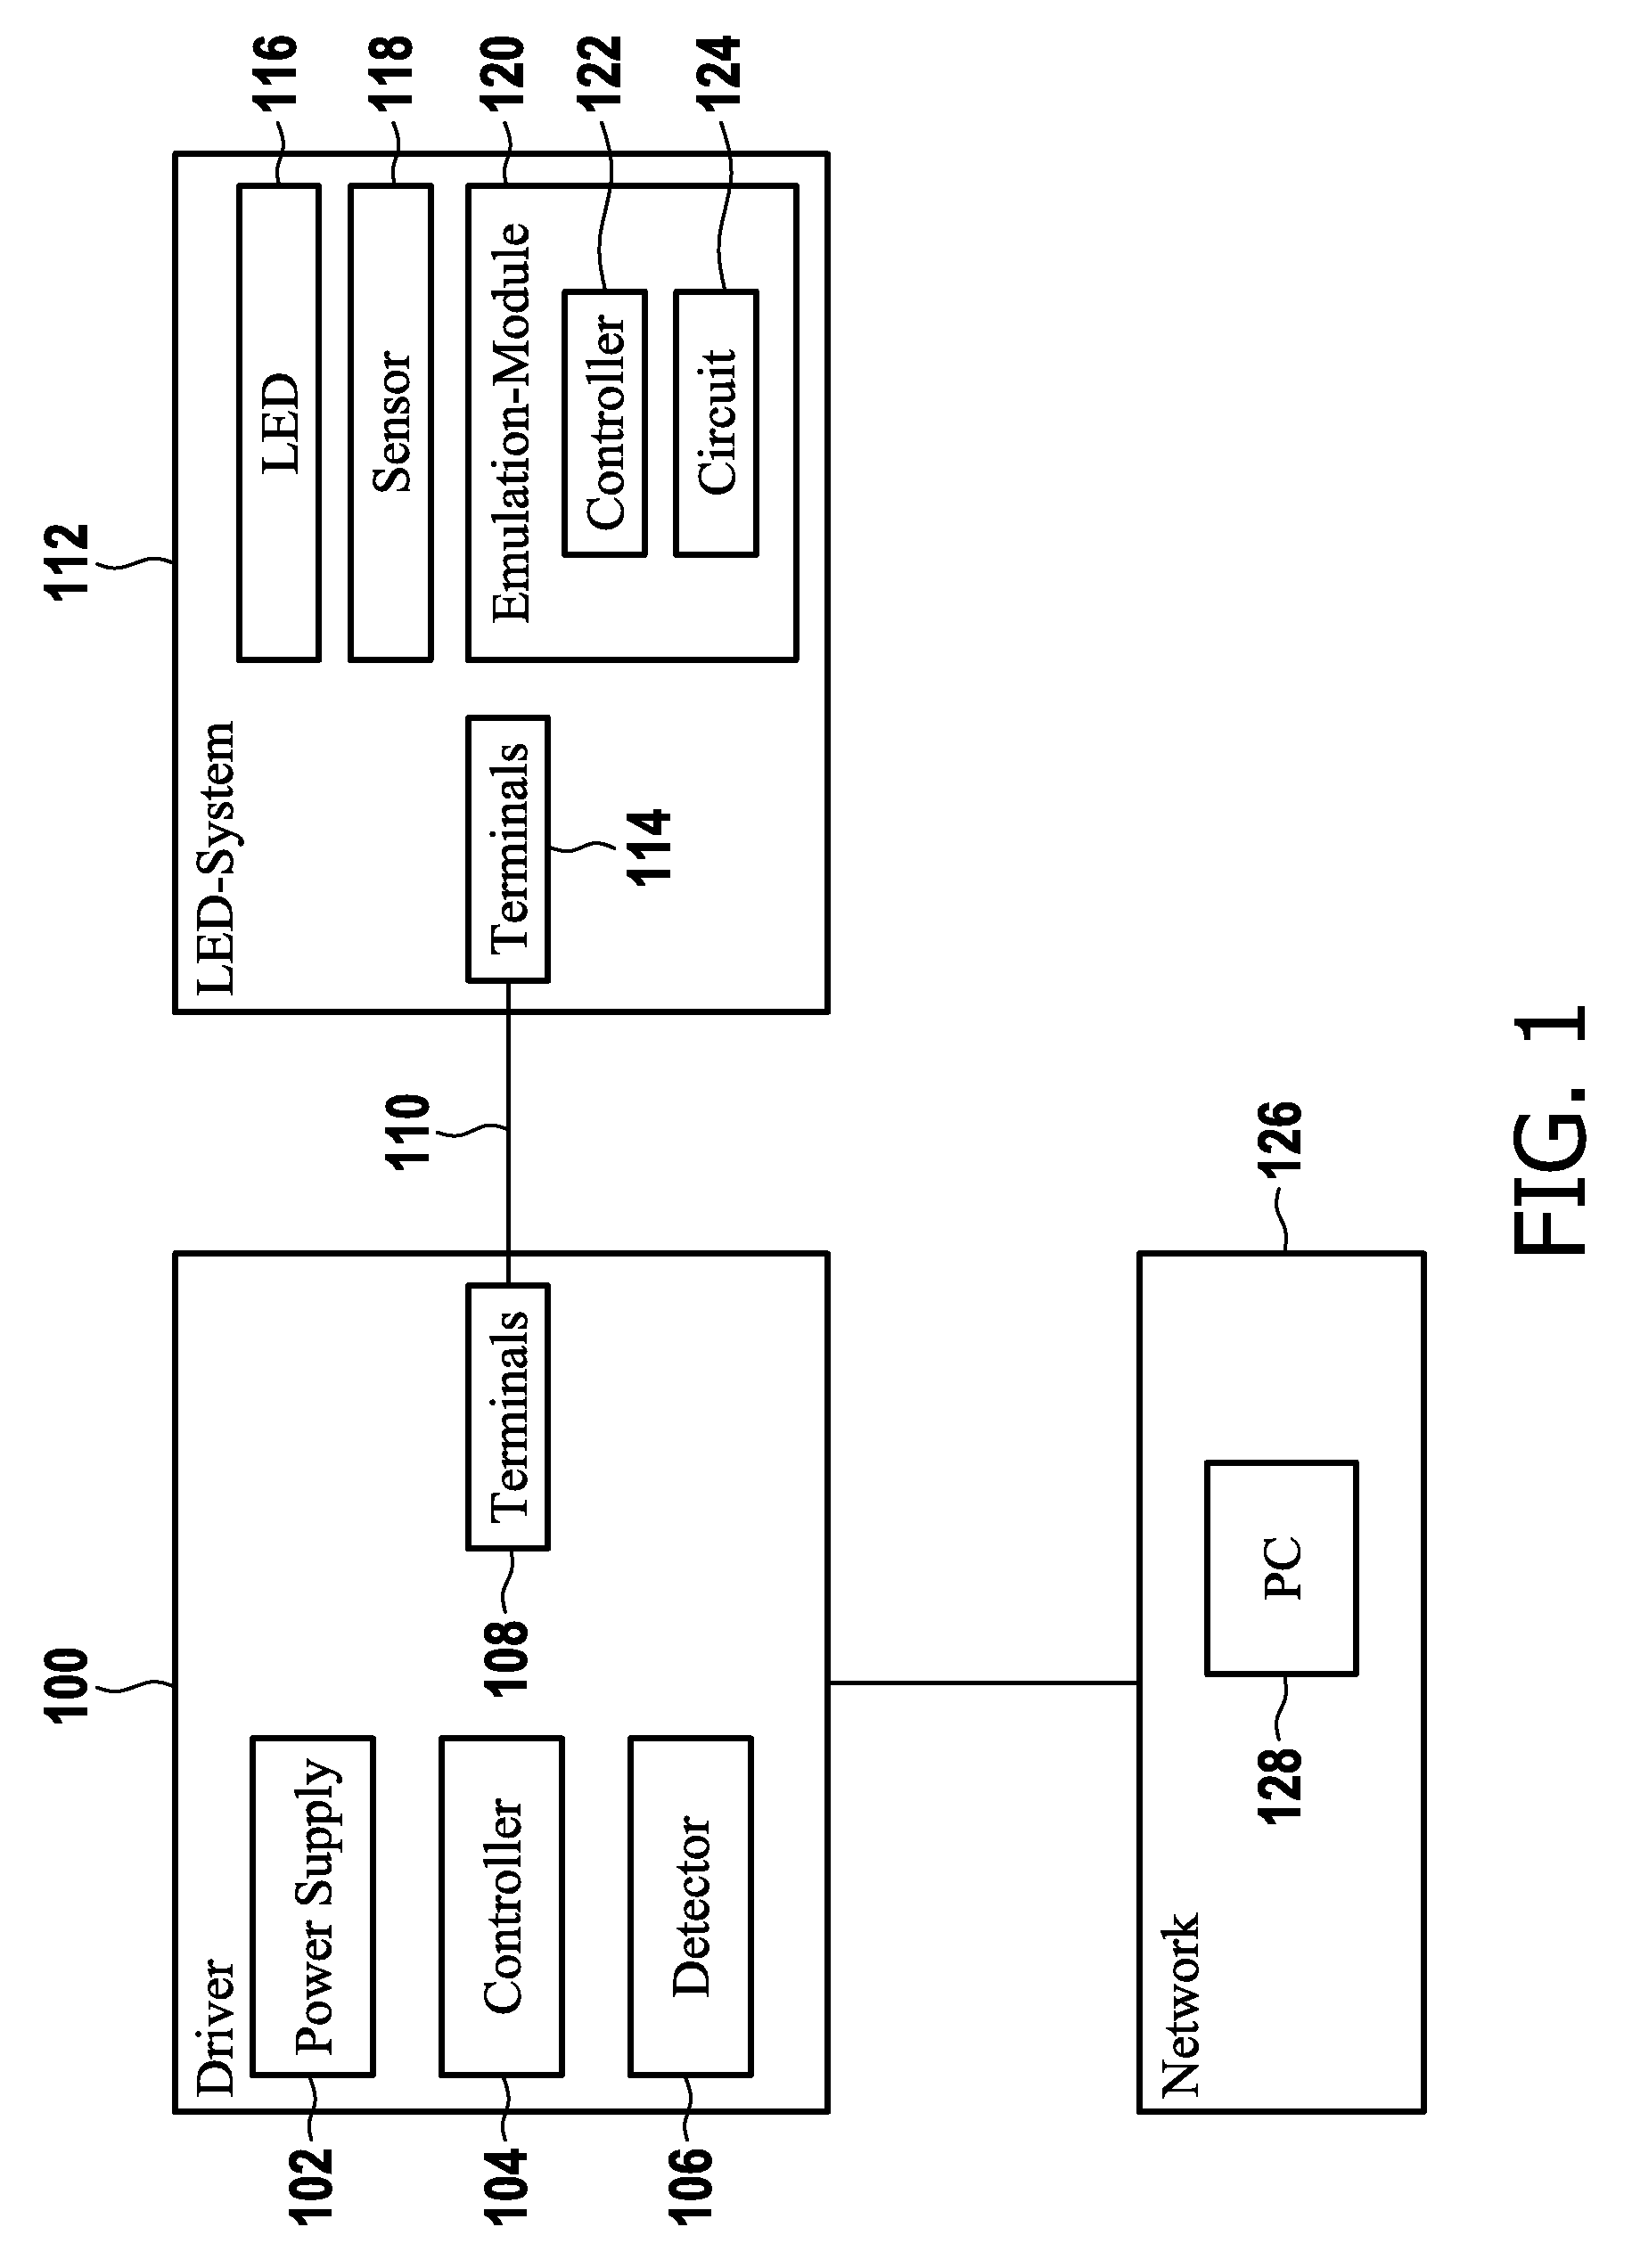 Light emitting device system and driver